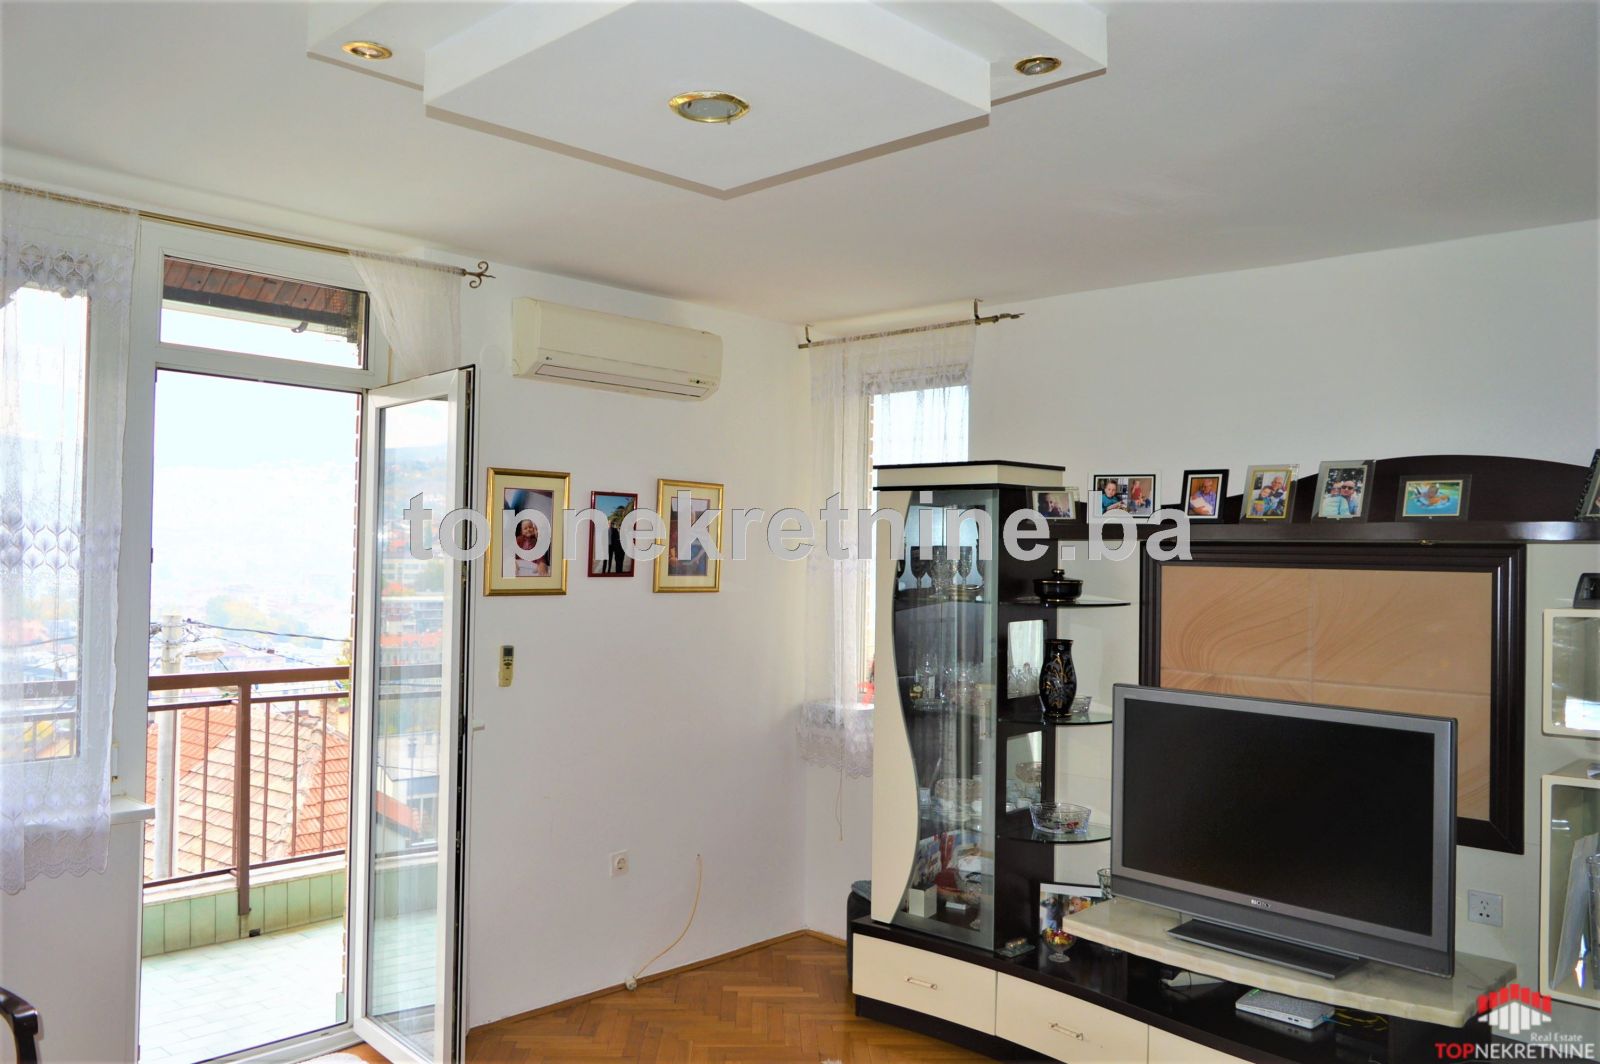 3BRD apartment with 85 SqM, with a balcony, and one car garage 12 SqM, Odobasina St., Gorica